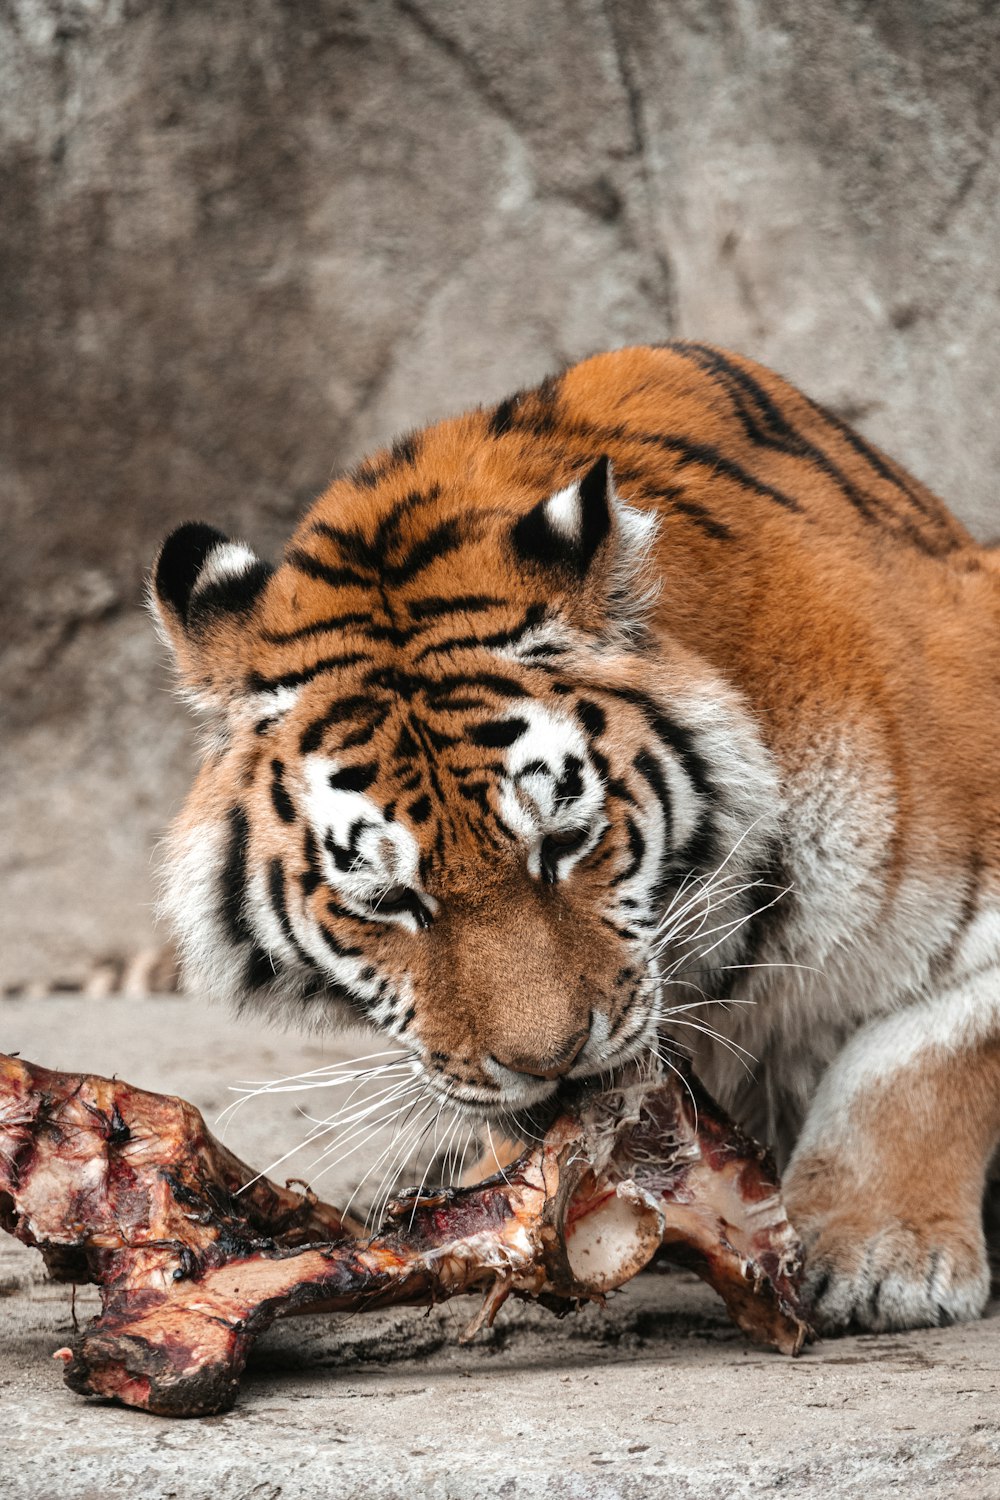 a tiger eating a bone on the ground